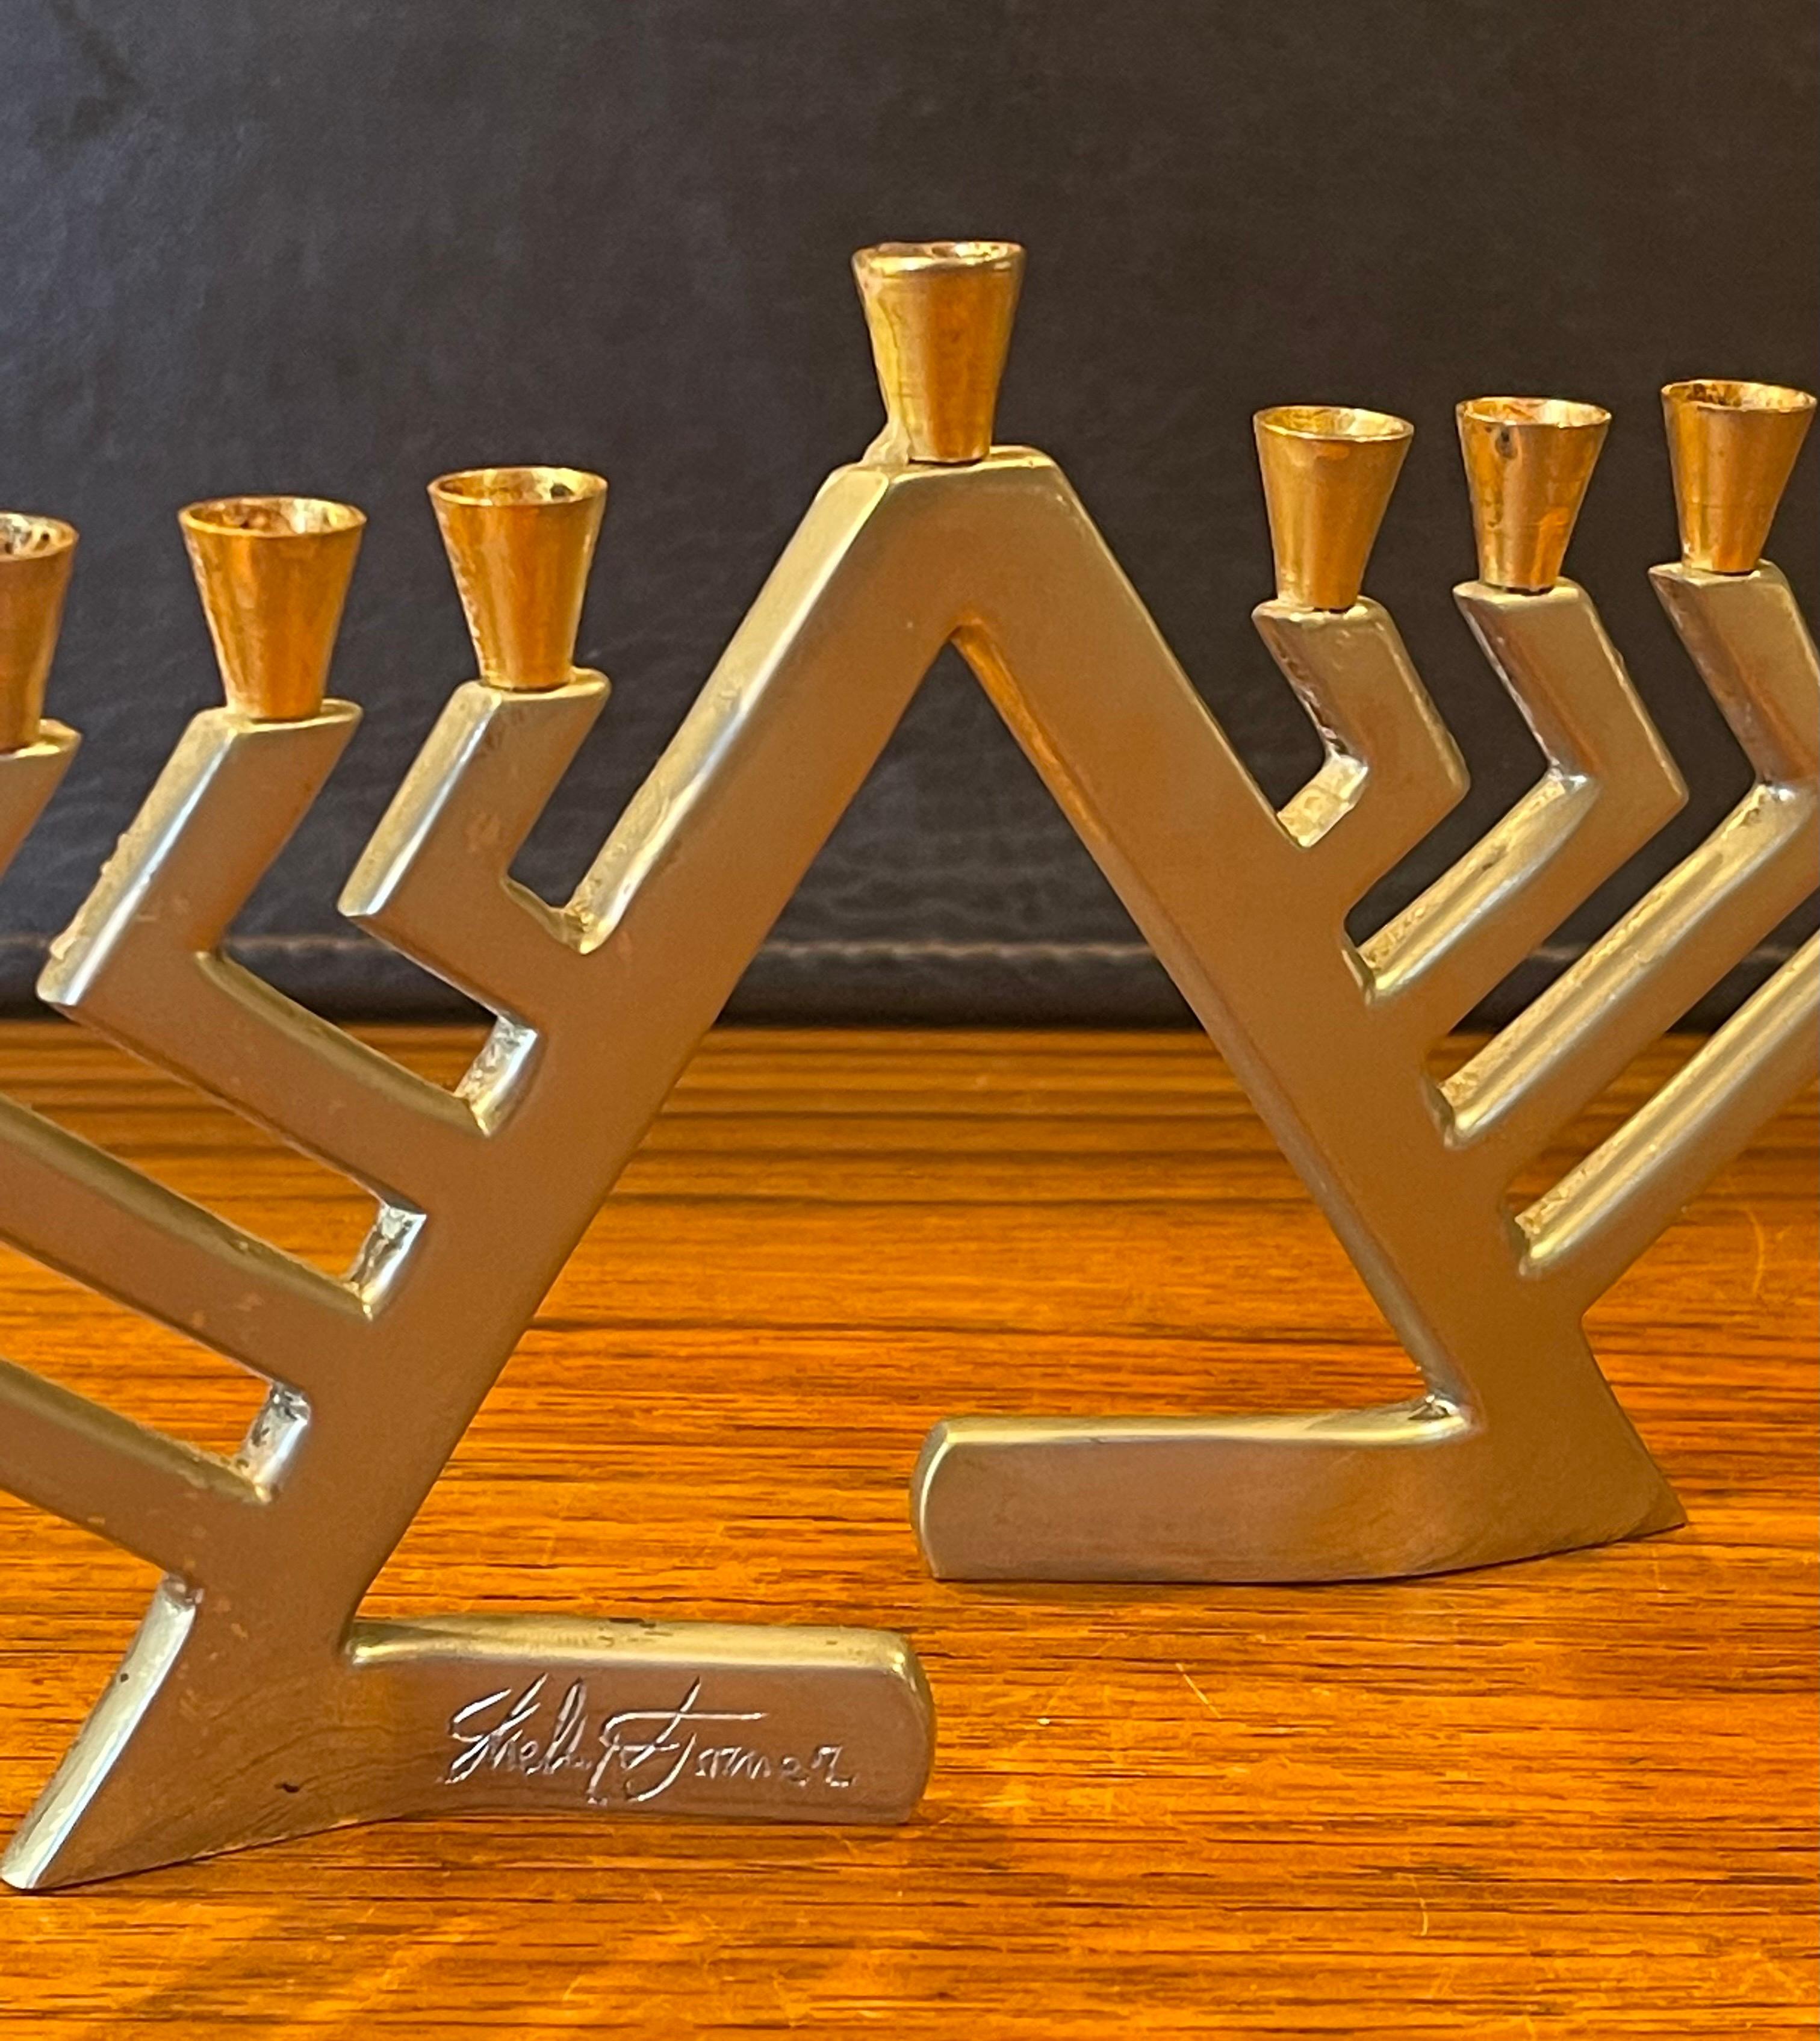 20th Century Modernist Stainless Steel & Brass Menorah by Shelly Turner for Alef Judaica For Sale